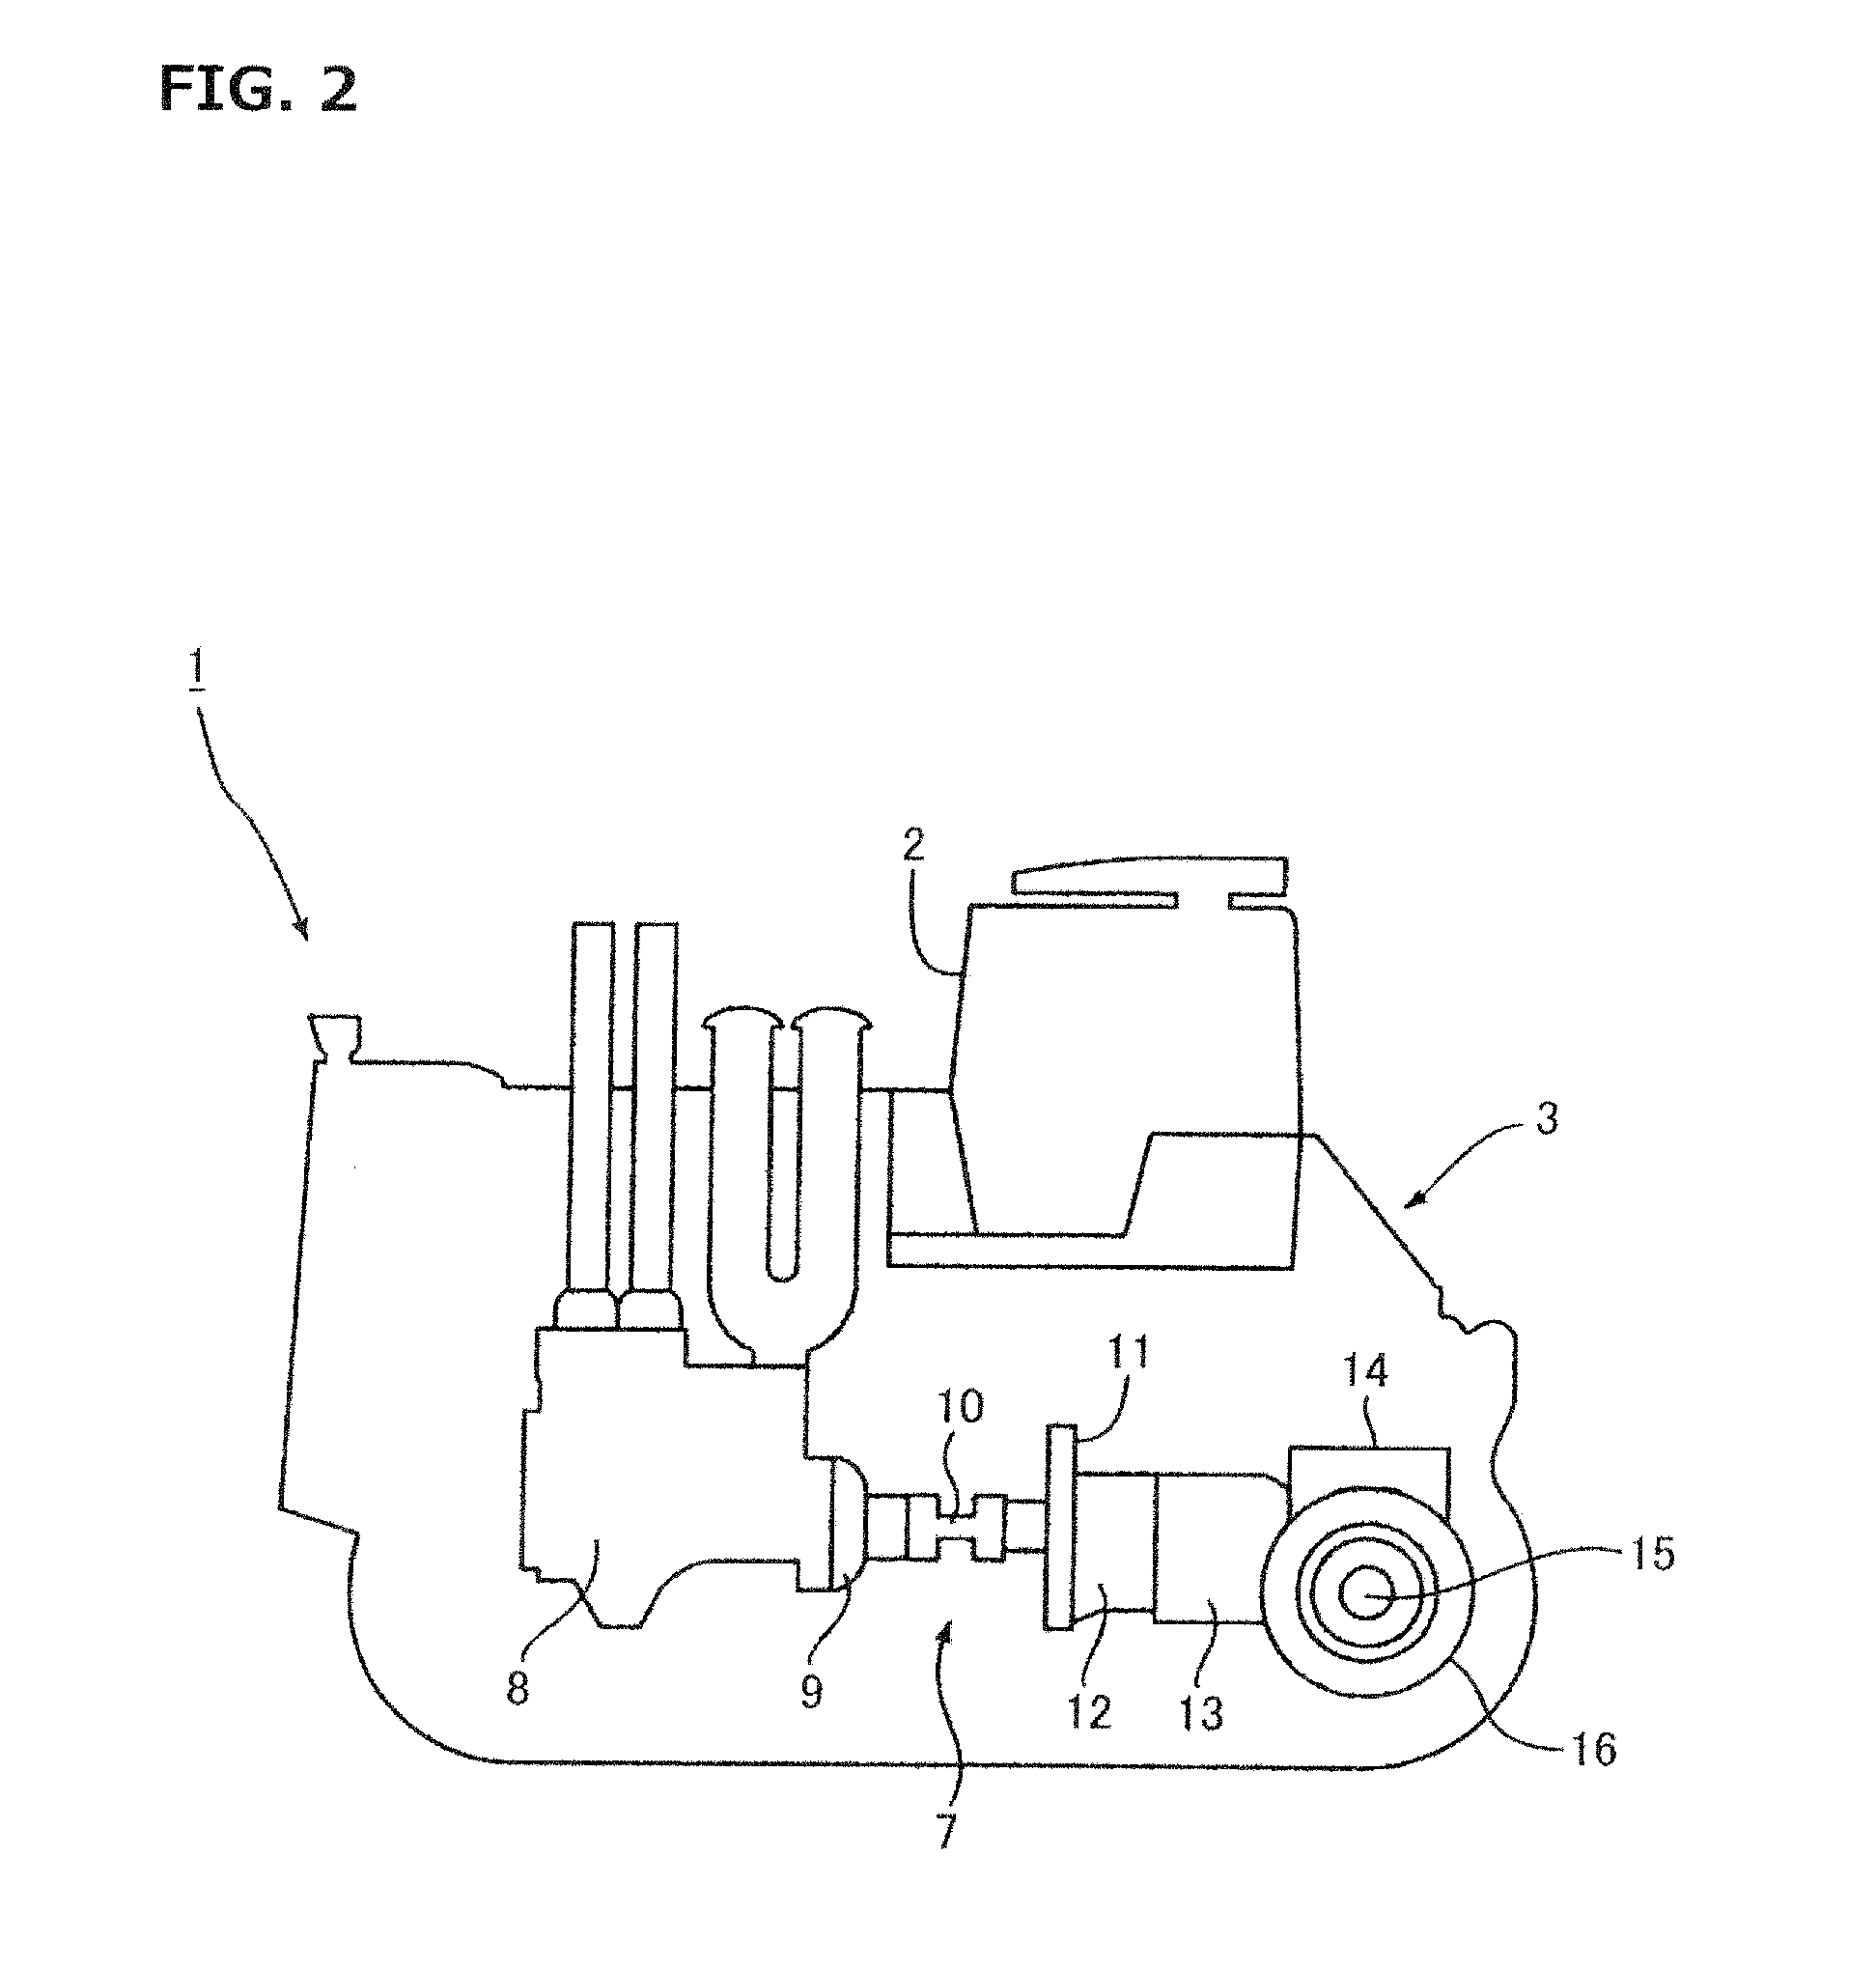 Suspension device for a work vehicle